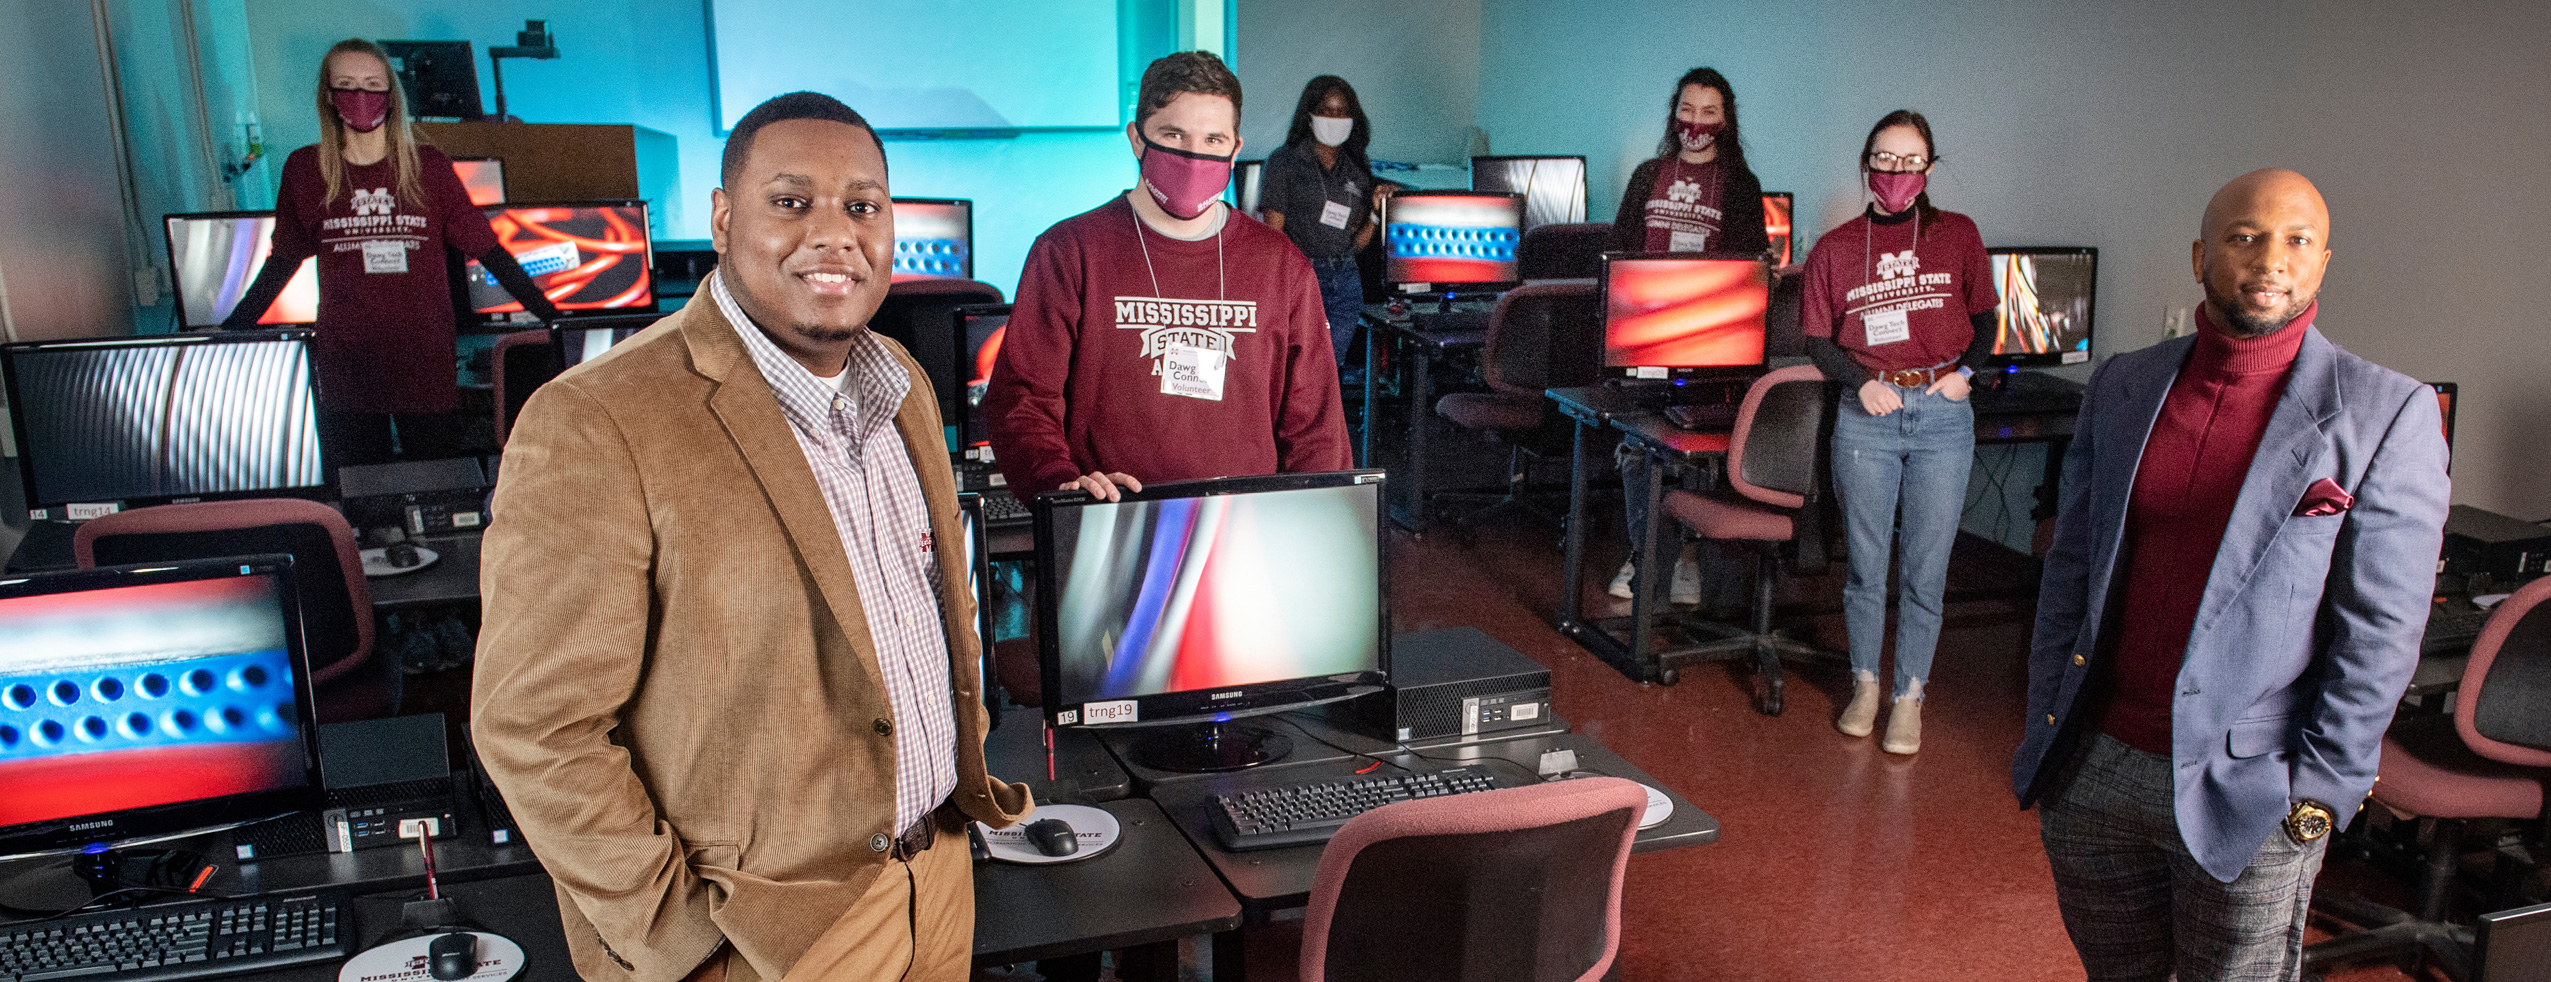 To help faculty adapt to new classroom technology, MSU’s Information Technology Services trained student volunteers from campus organizations to provide on-site support. ITS desktop services manager Ronald Gatewood (front right) said it was a win-win situation that kept classes on track and provided valuable customer-service experience to students like Taylor Ball (front left), an information technology services major whose success turned his volunteer position into a paid, part-time position.